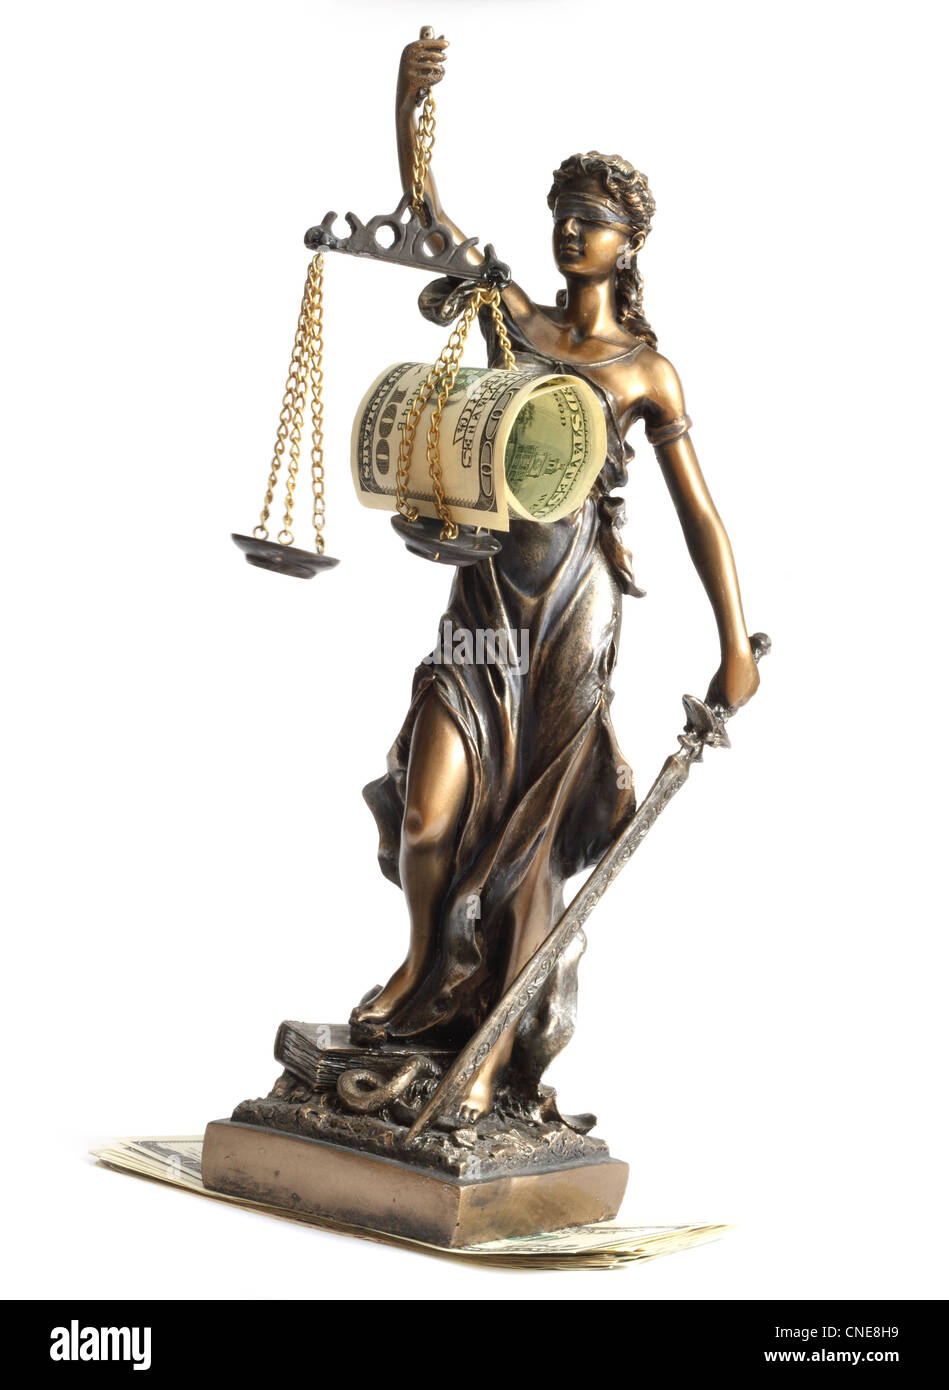 Statue of Justice, with money from Virgo Stock Photo